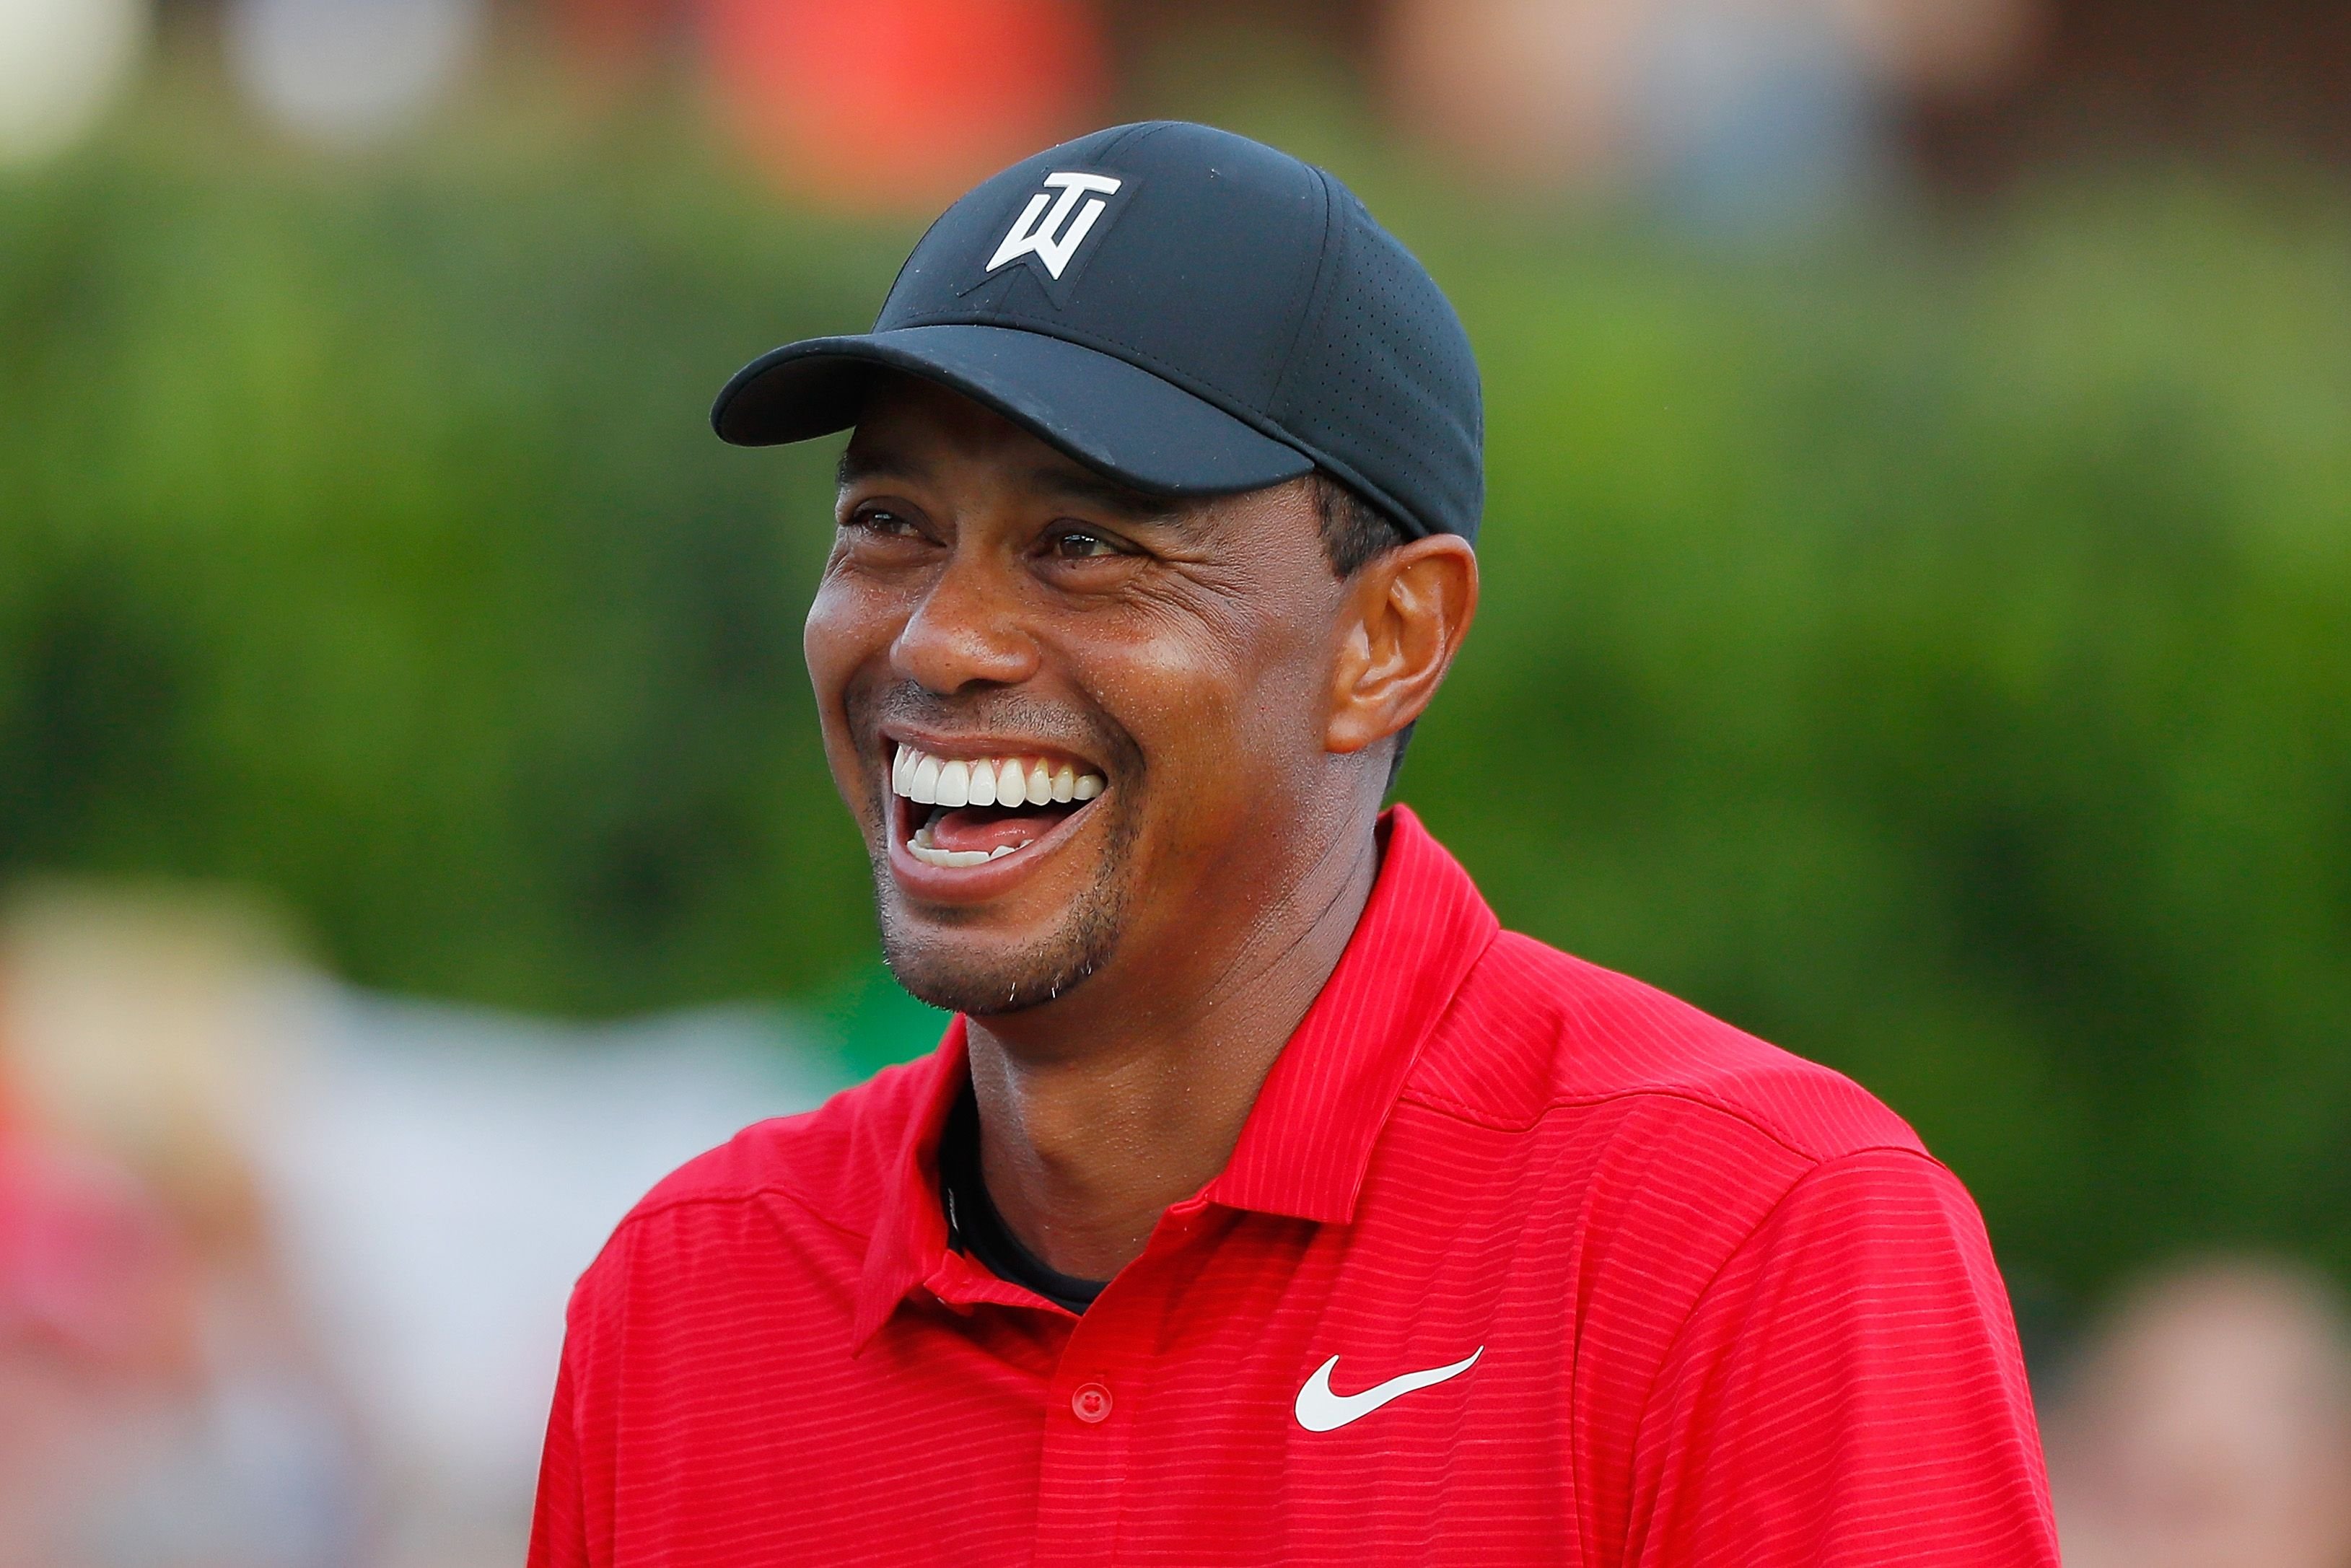 Tiger Woods during the trophy presentation ceremony after winning the TOUR Championship at East Lake Golf Club on September 23, 2018 in Atlanta, Georgia | Photo: Getty Images